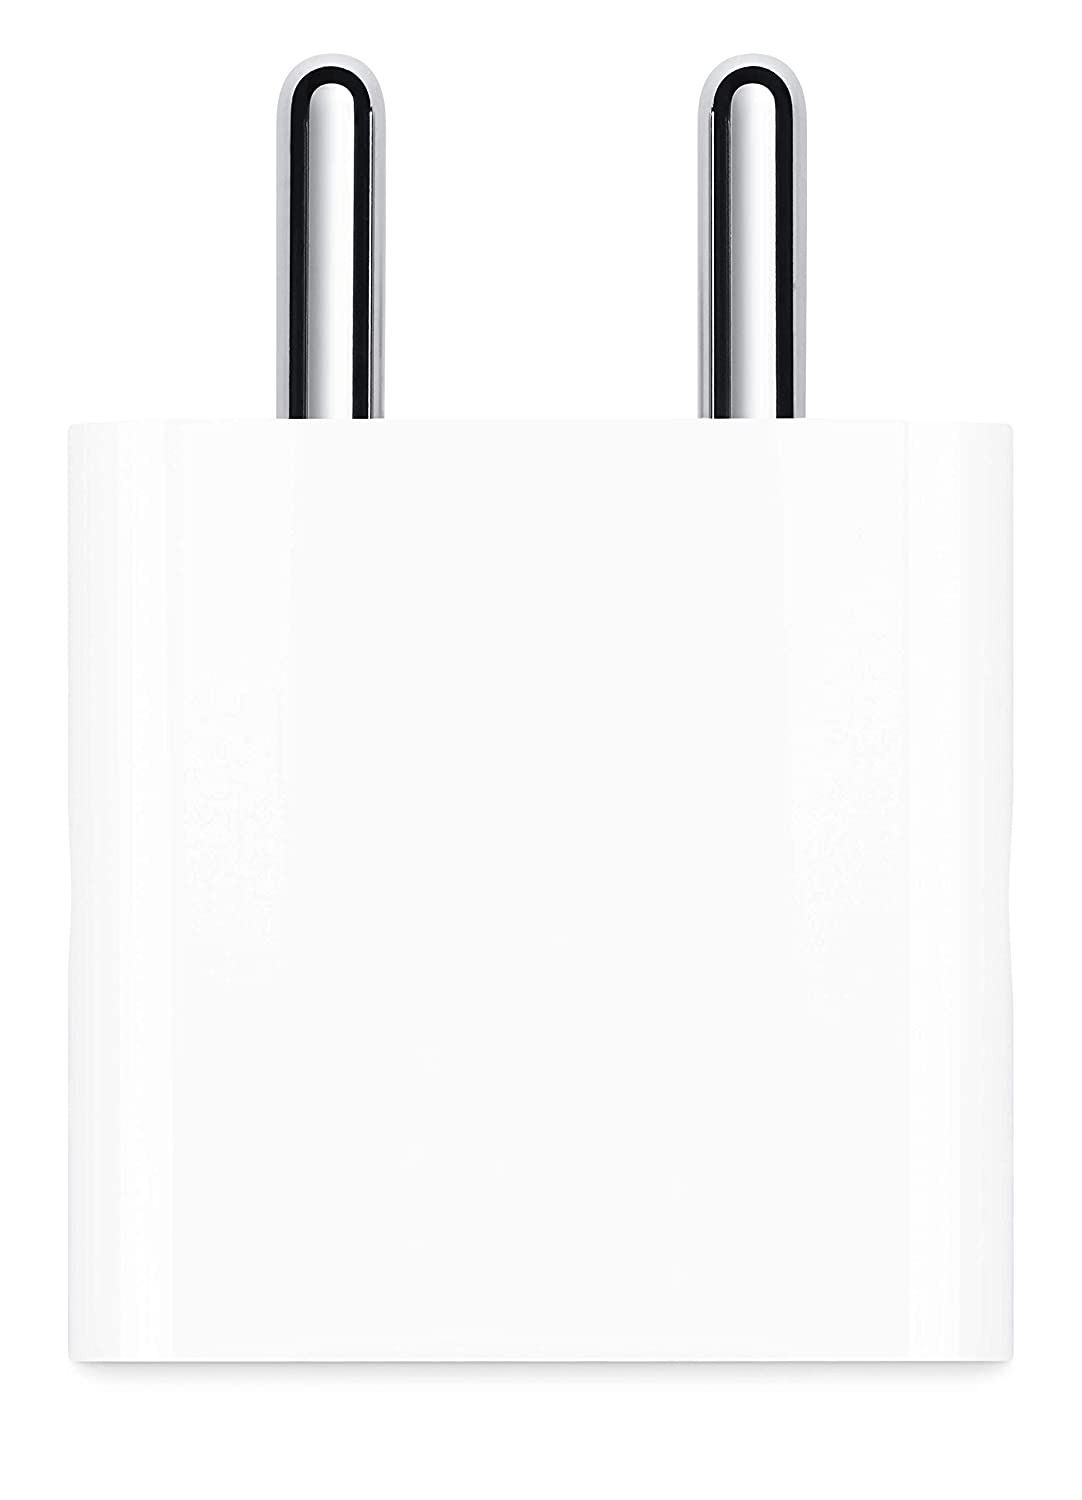 Open Box, Unused Apple 20W USB C Power Adapter  for iPhone iPad & AirPods